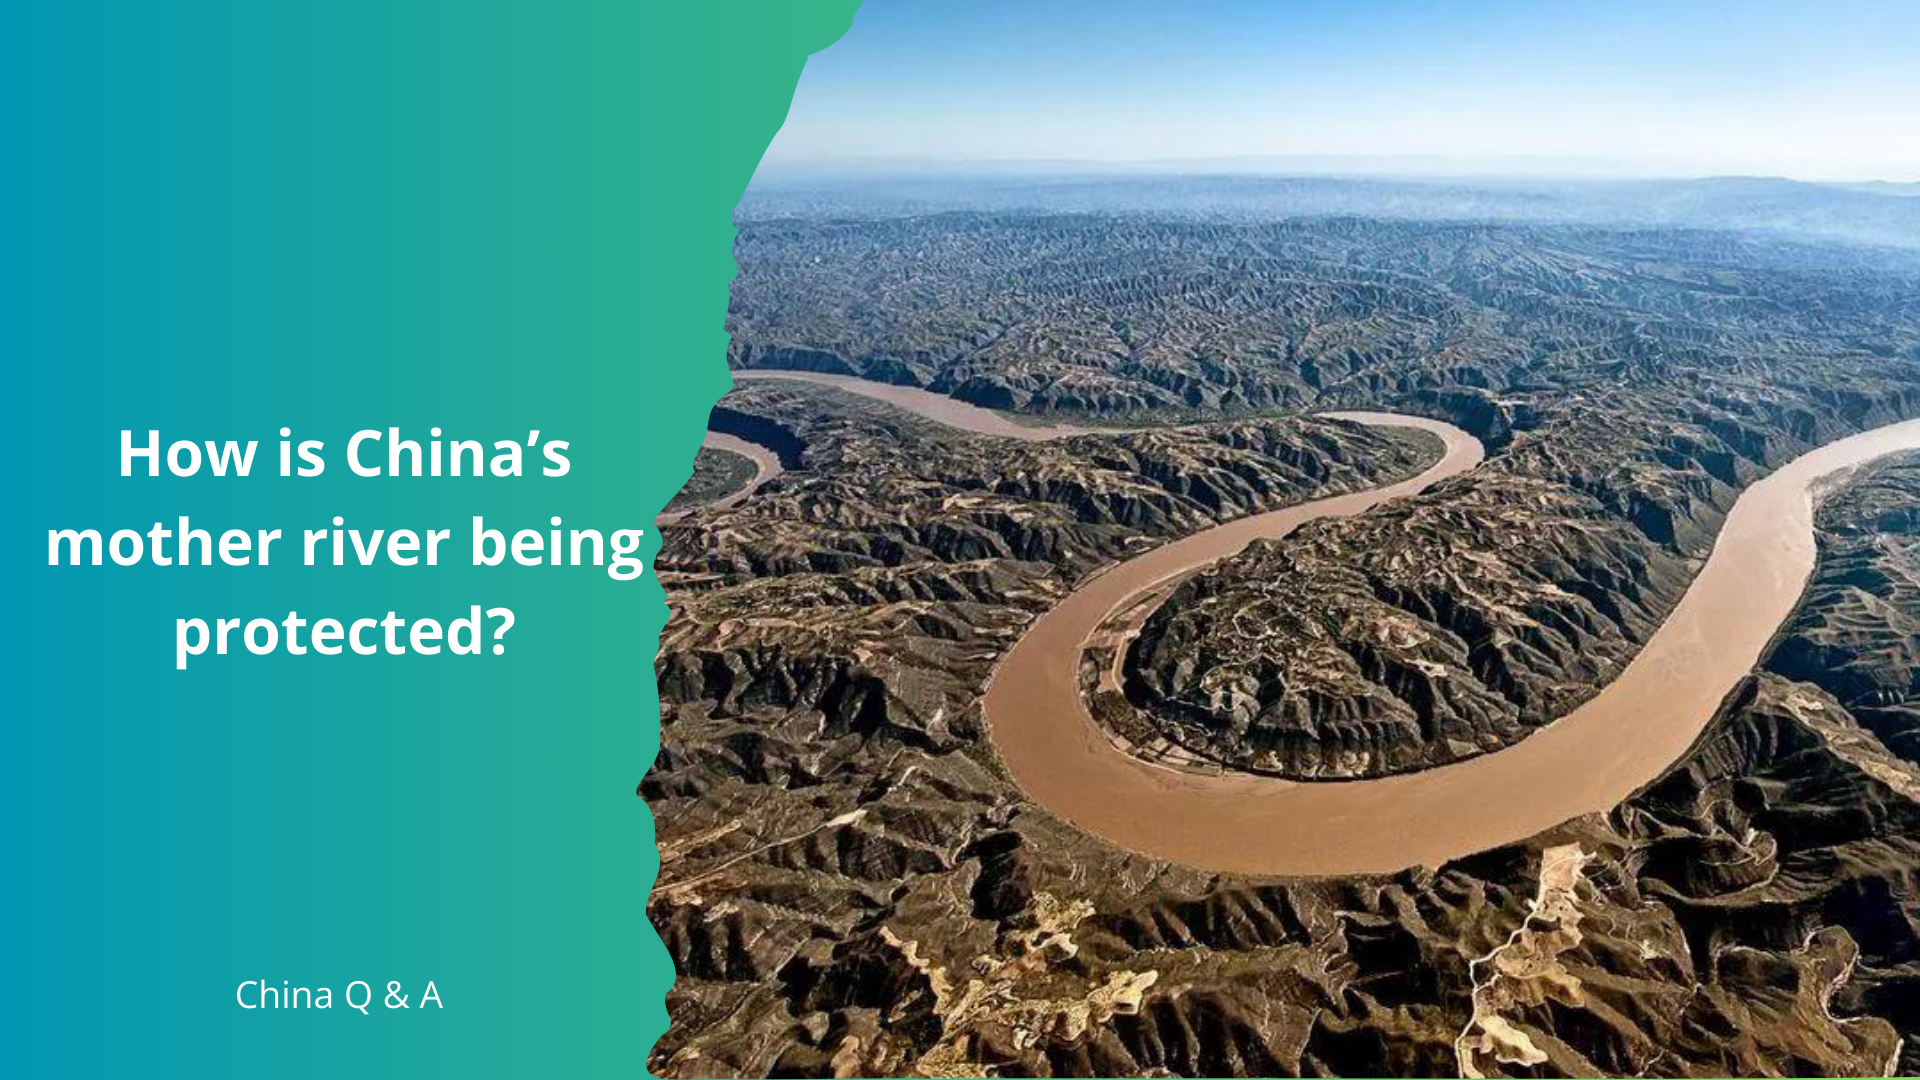 How is China's mother river being protected?